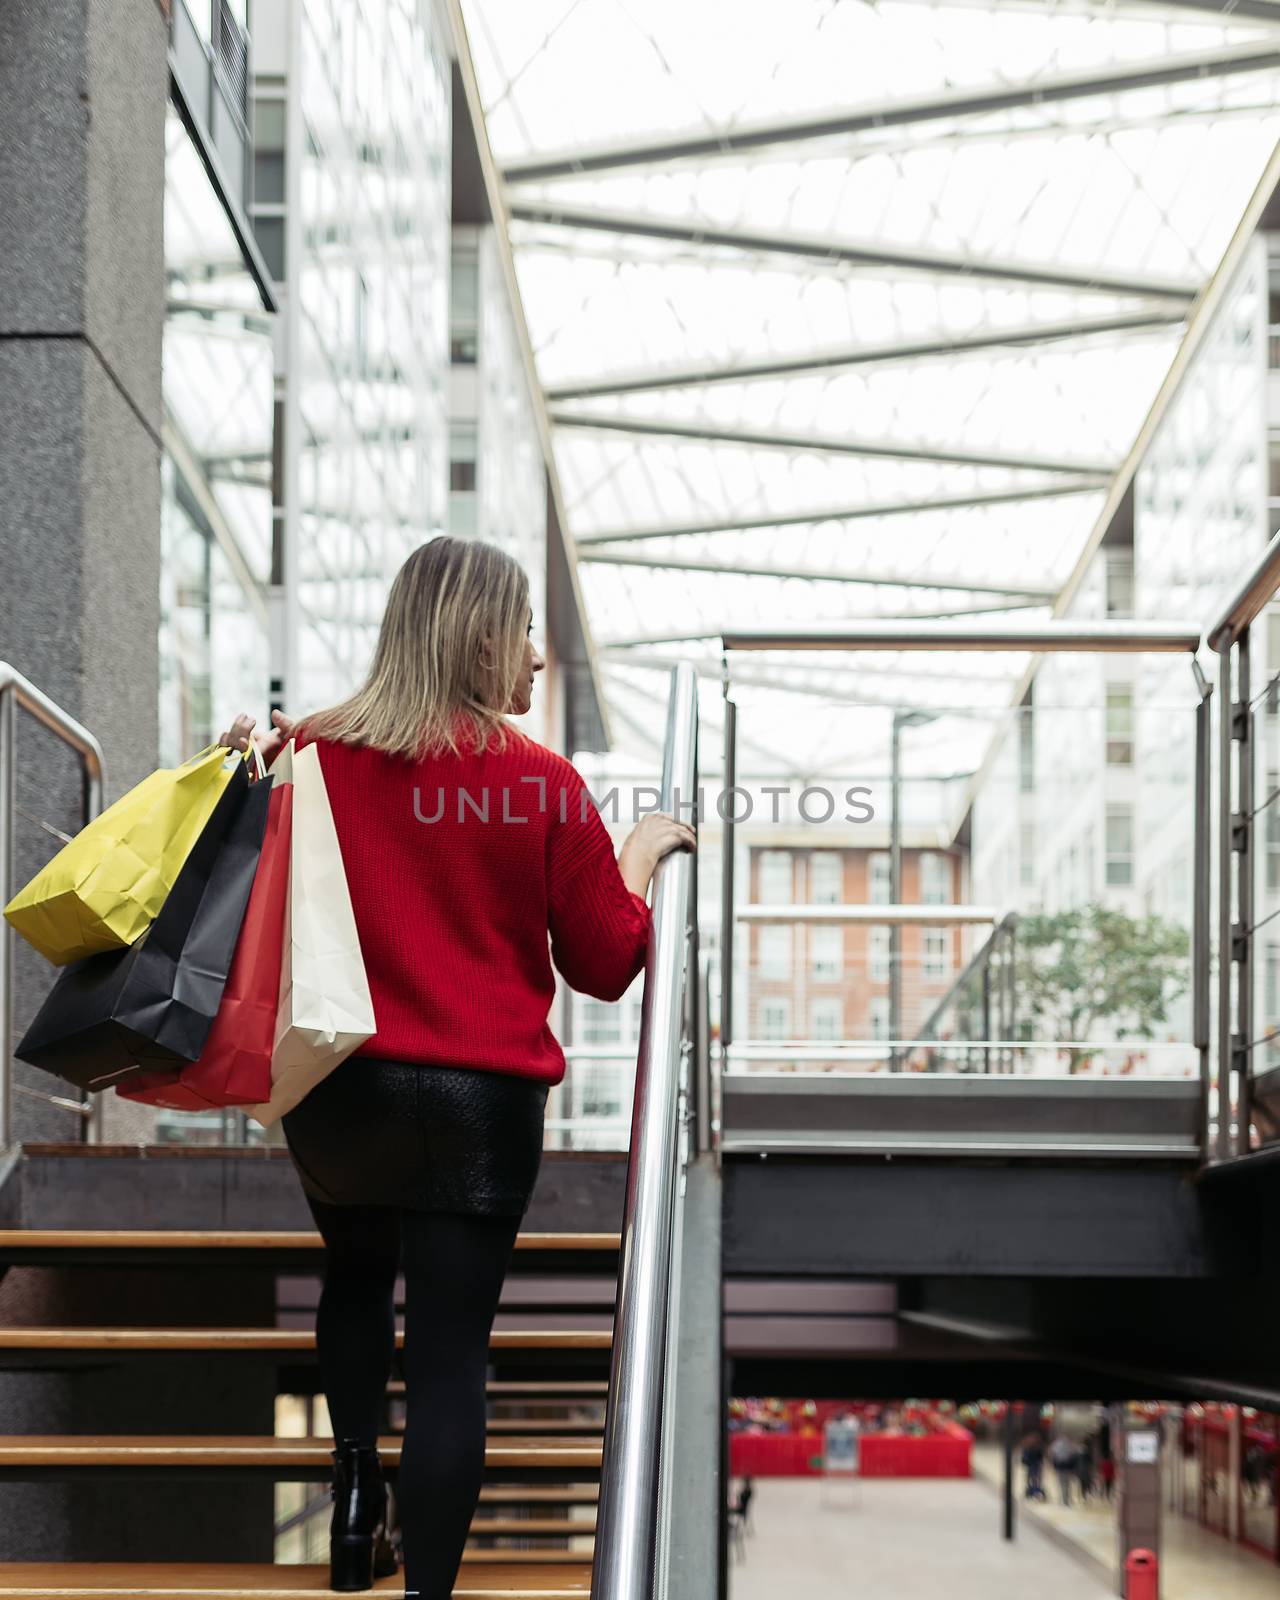 Adult woman wearing a red sweater walking up the stairs of a shopping mall carrying colorful shopping bags.